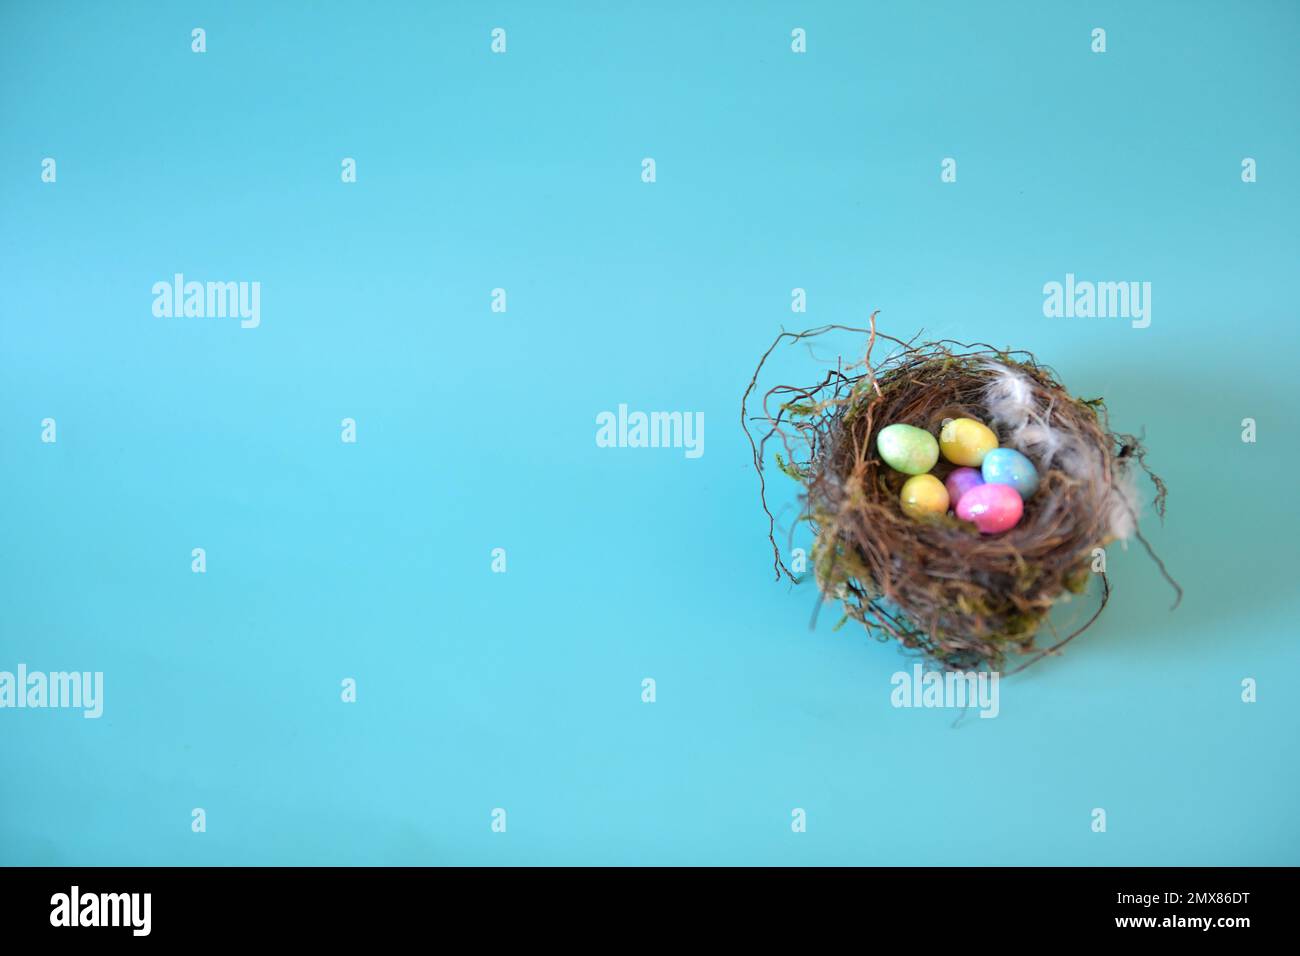 Horizontal photo of colorful Easter eggs against turquoise background.  Copy space to the left. Stock Photo